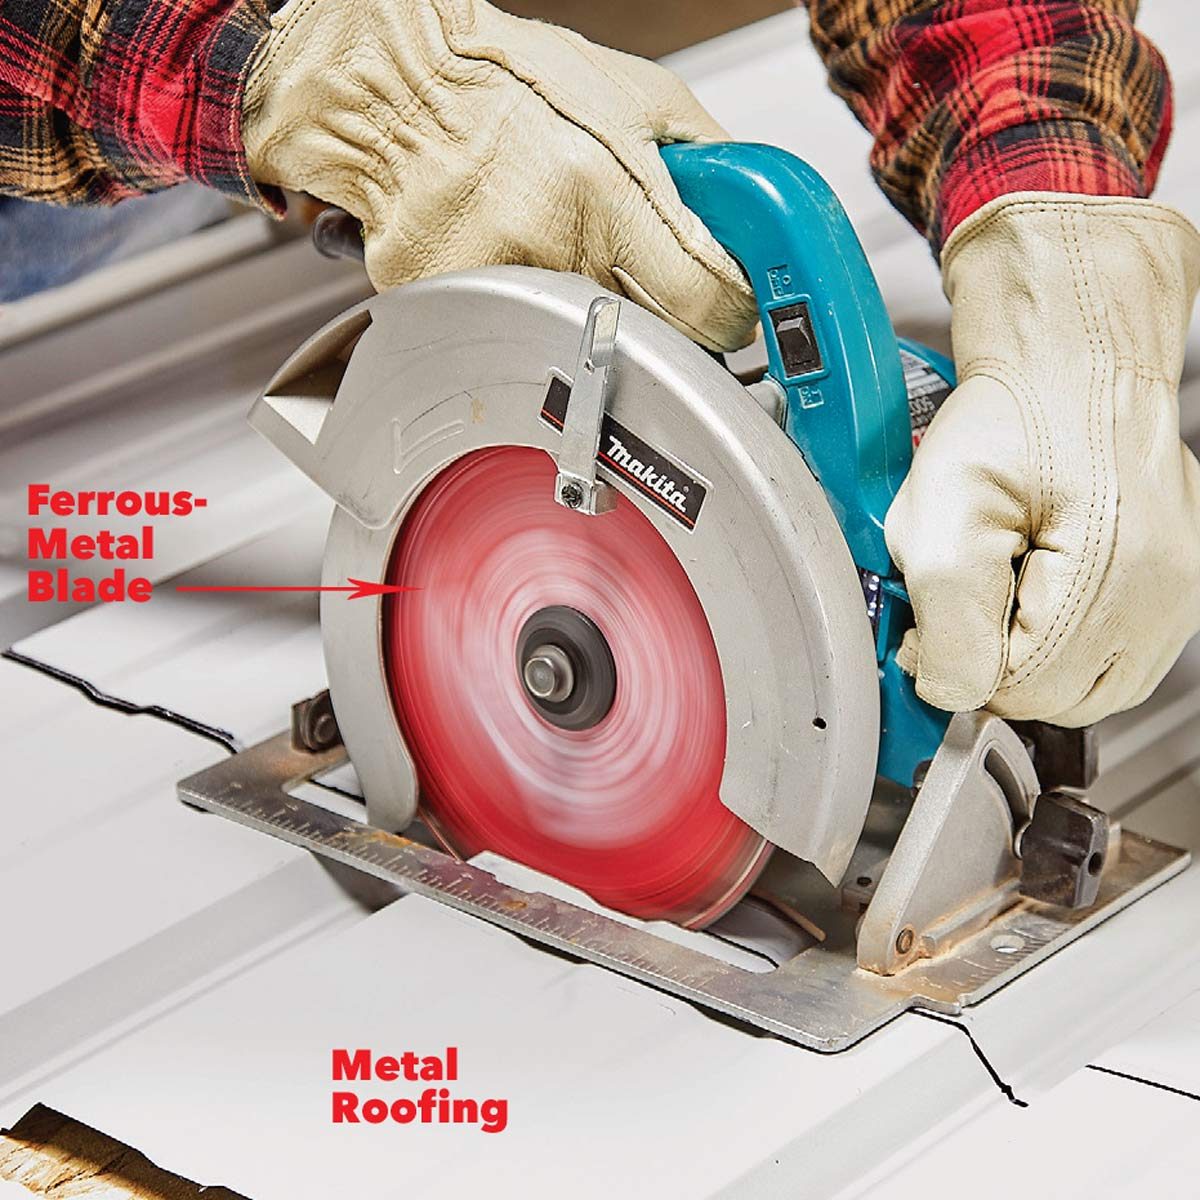 can a table saw be used to cut metal? 2